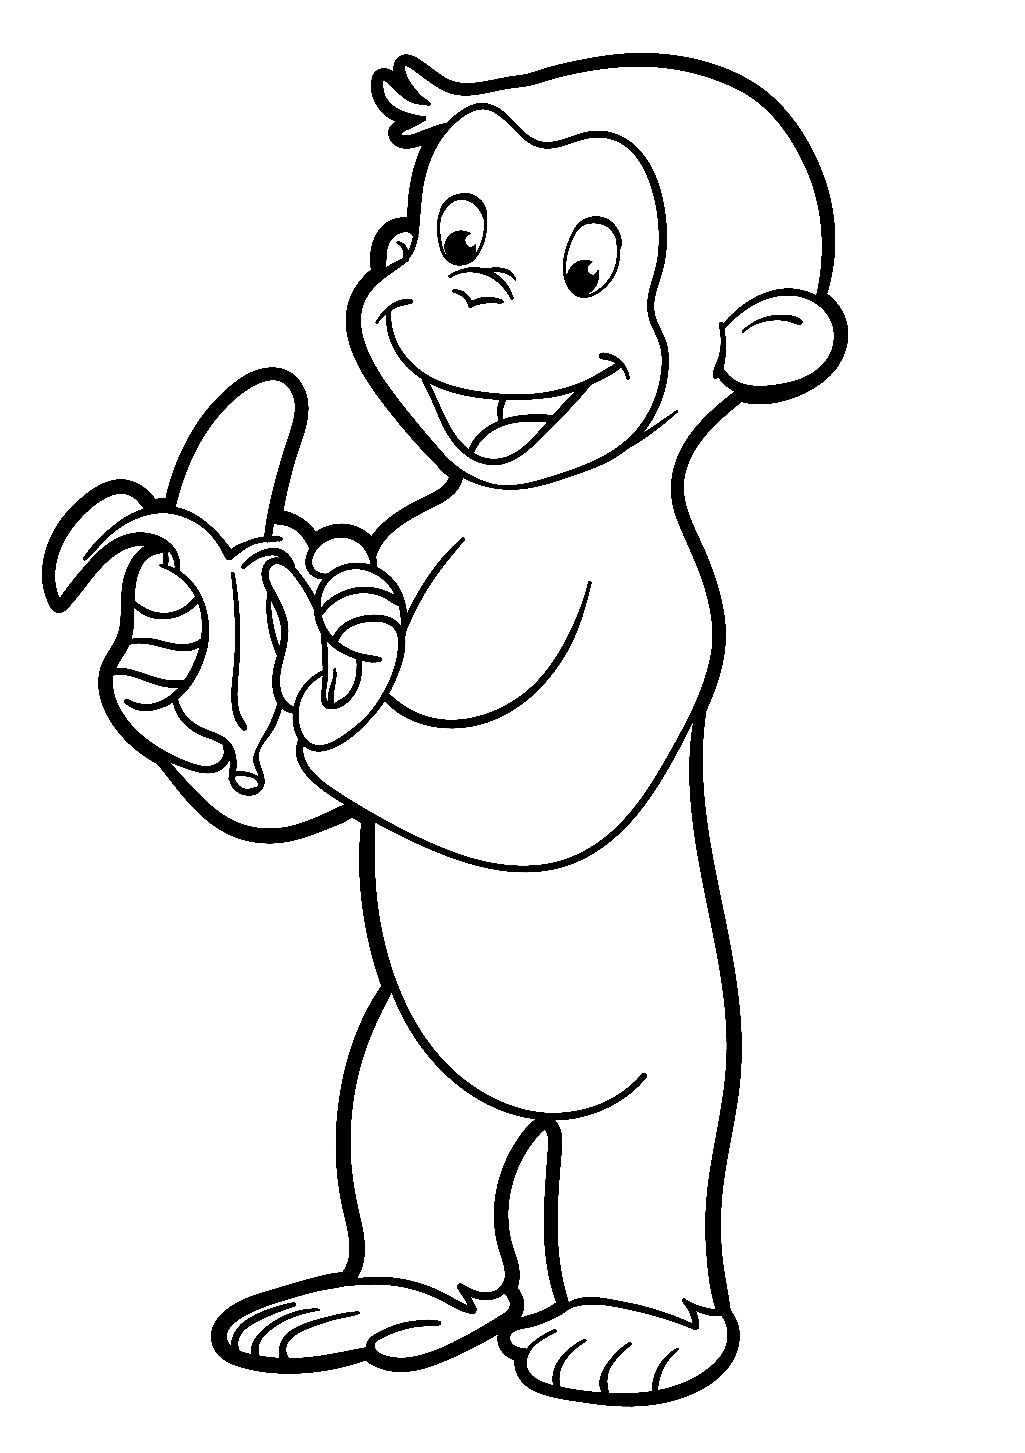 George Eating a Banana Coloring Page